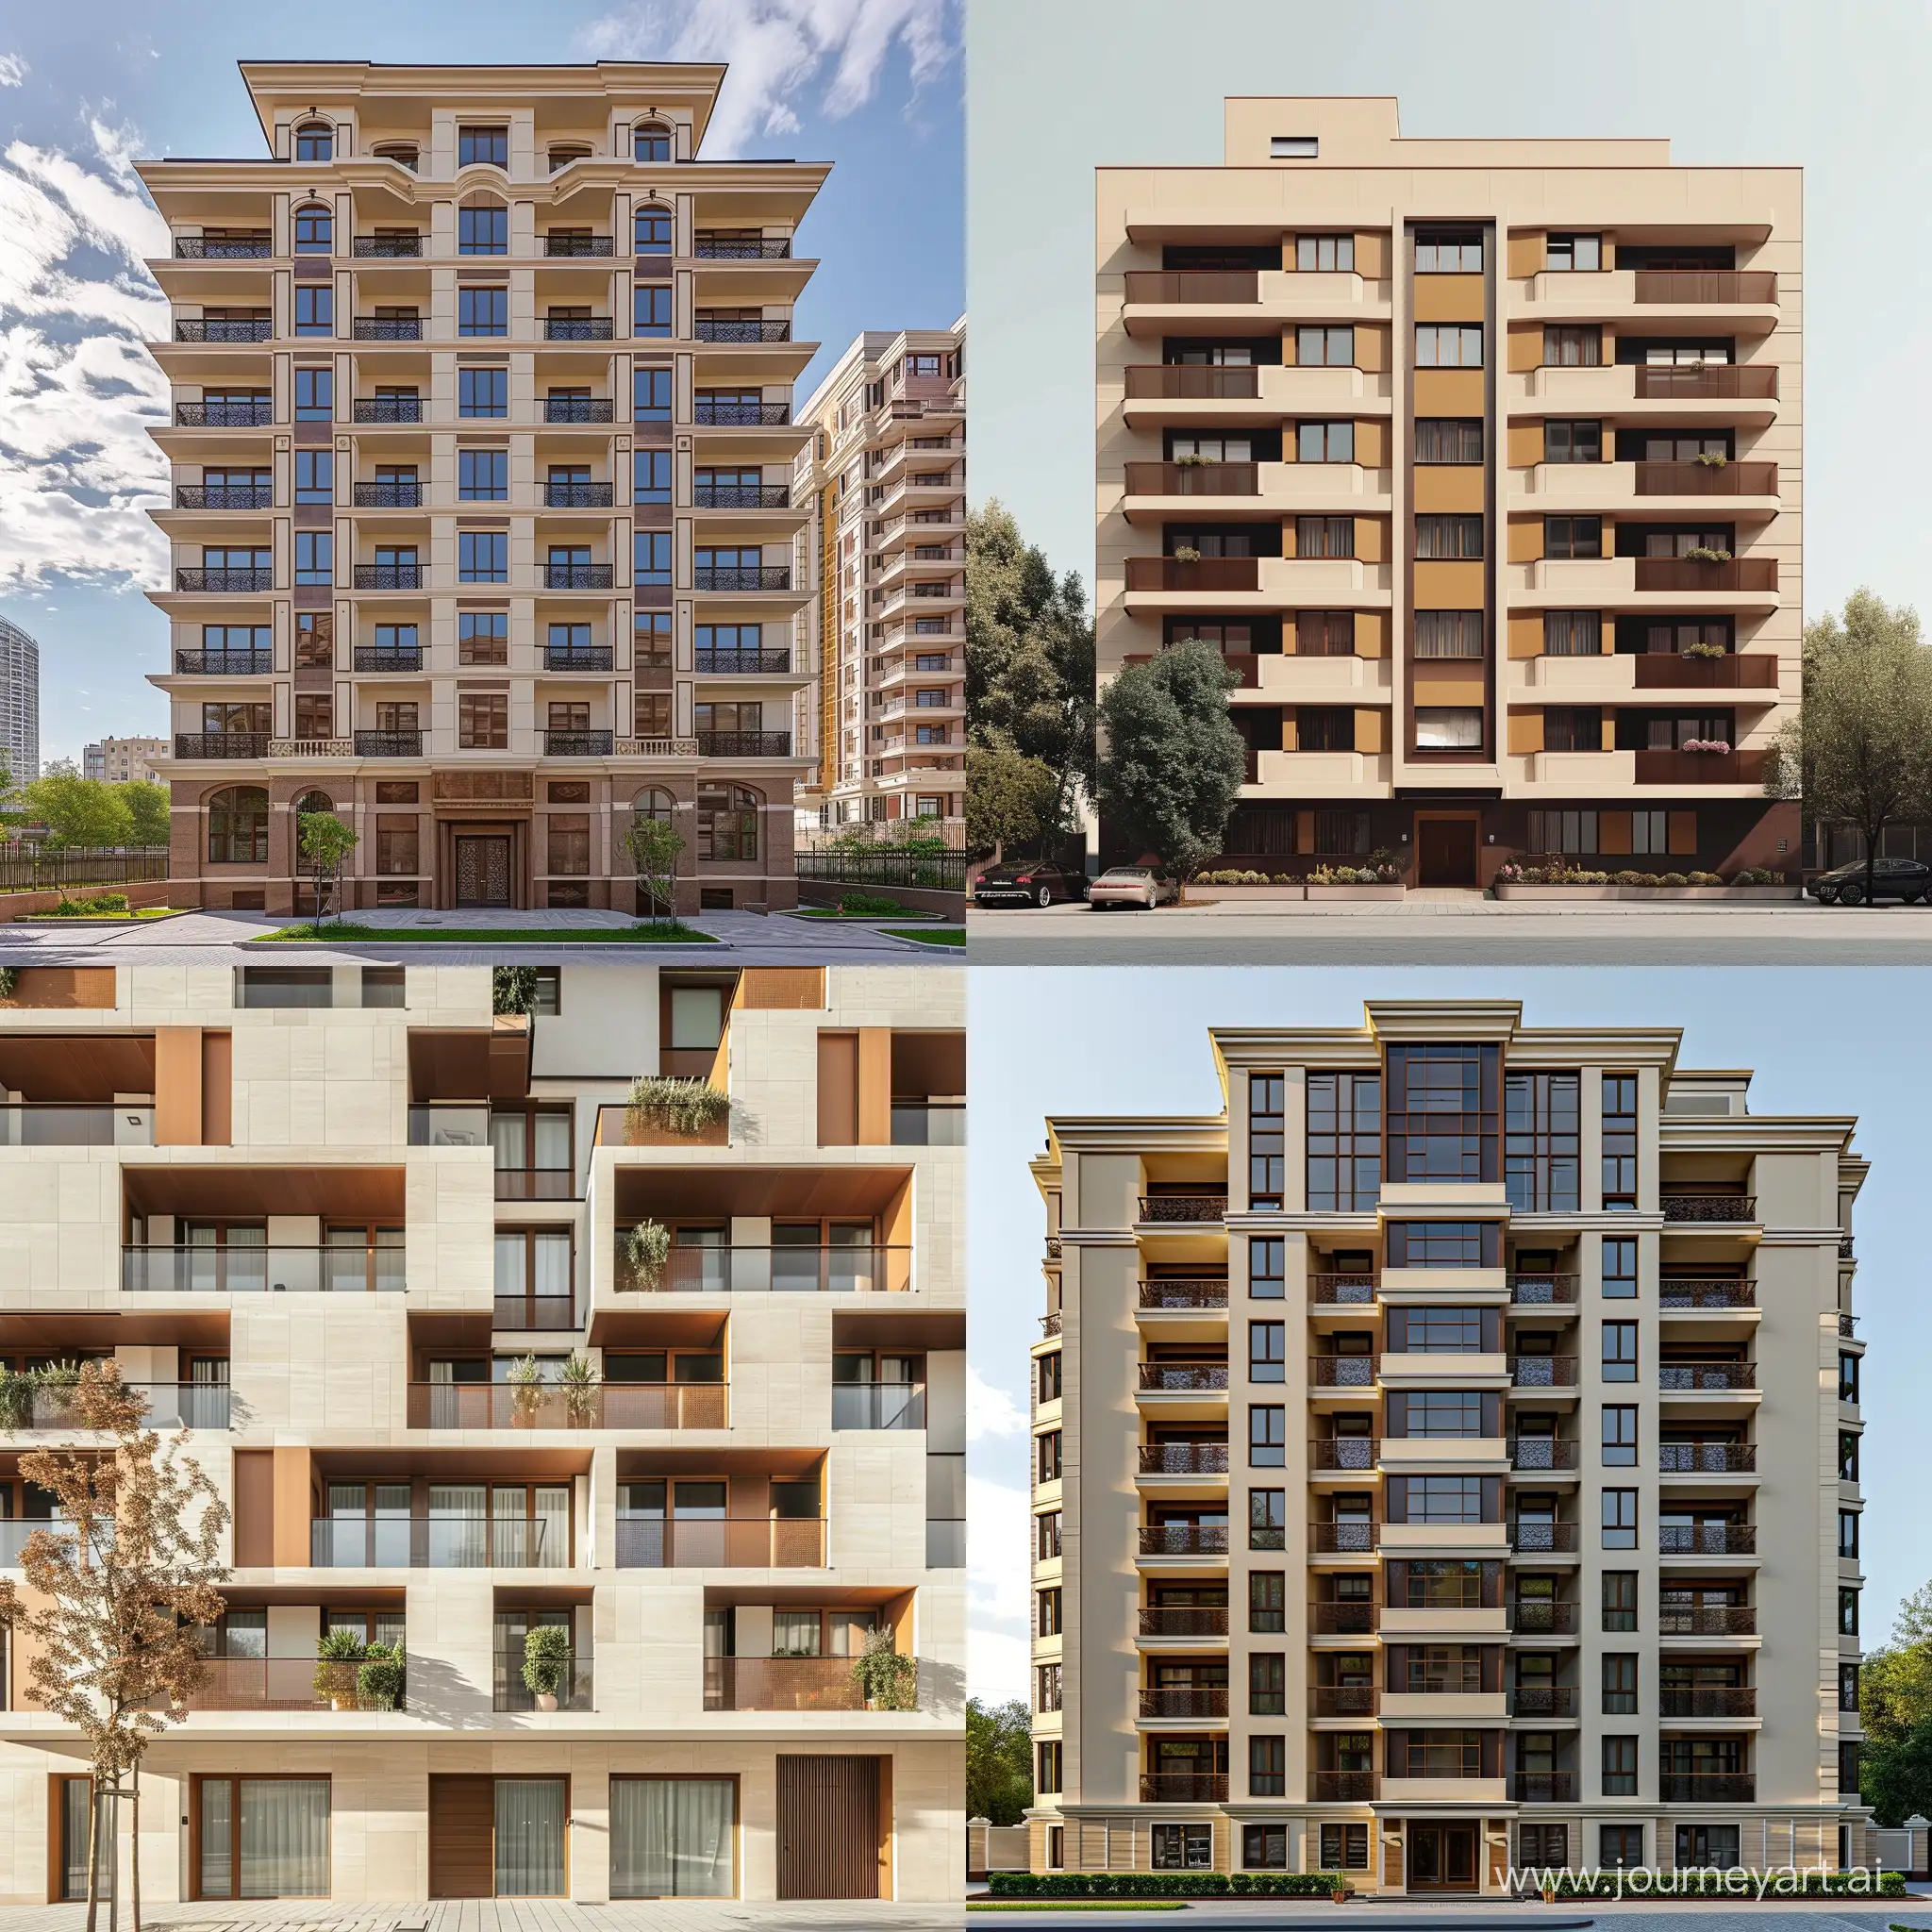 Captivating-Beige-and-Brown-MultiStorey-Building-Facade